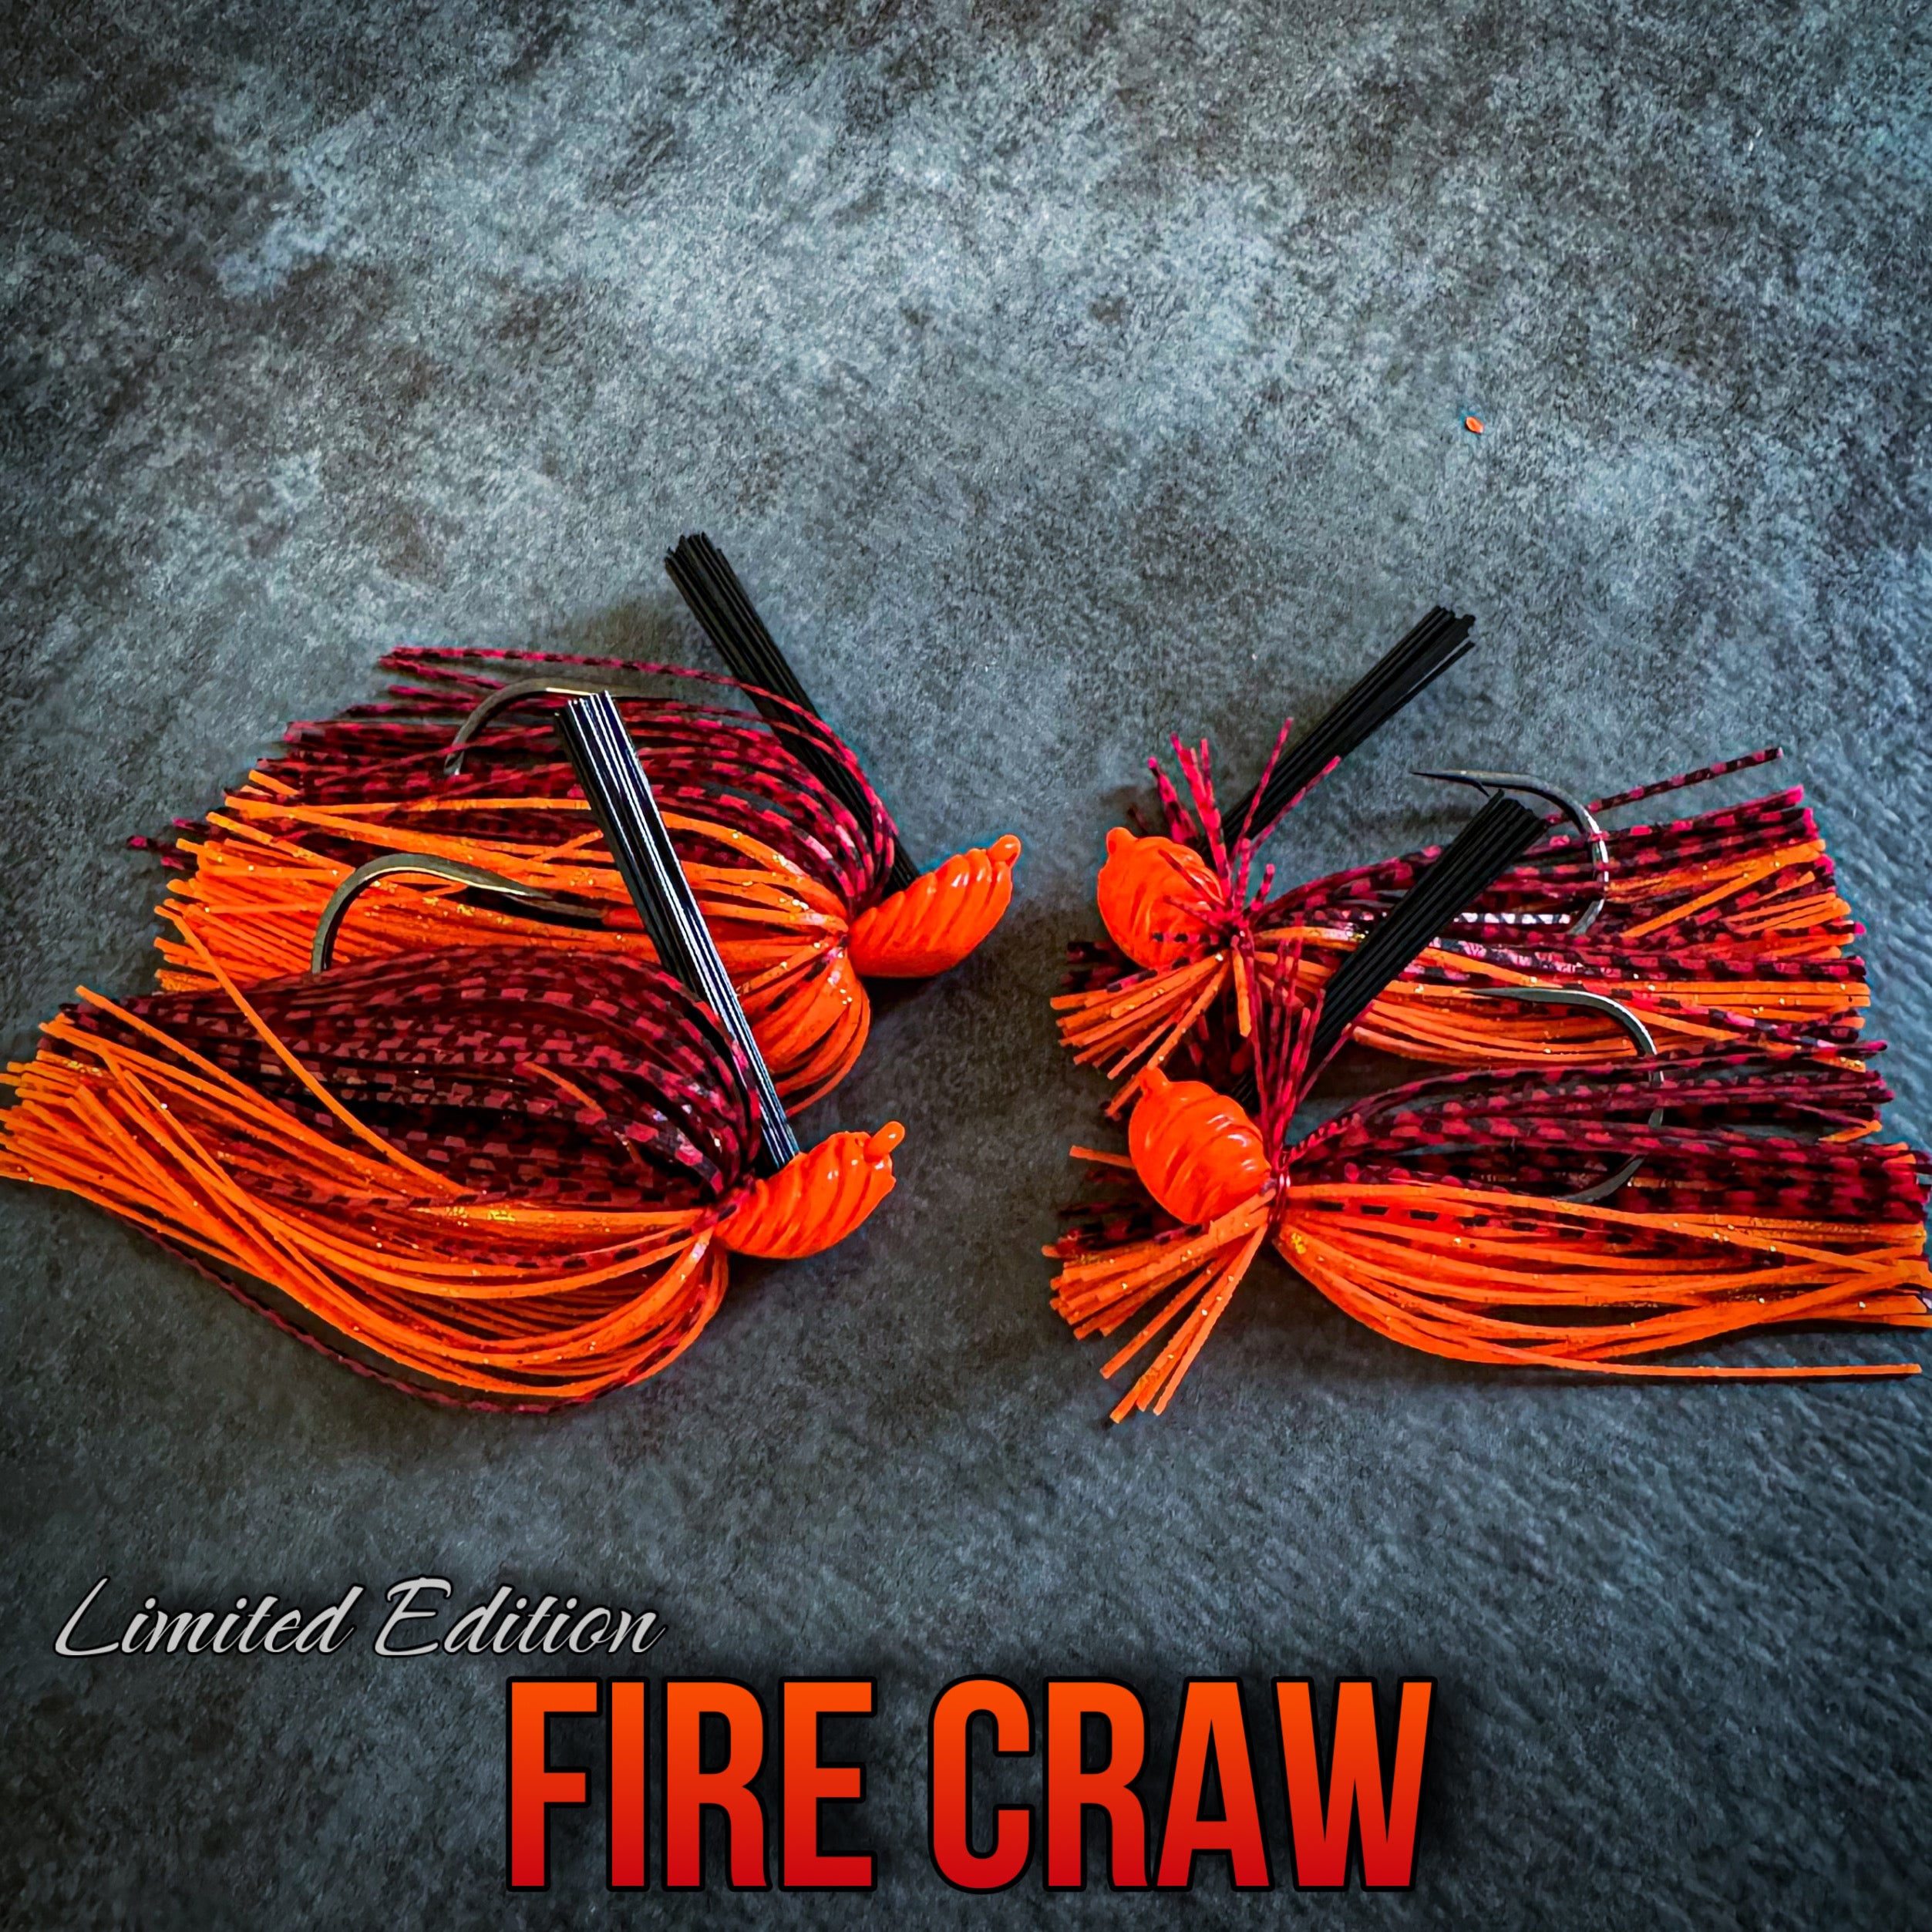 Exclusive Fire Craw Jigs — Made to order please allow 1 week to ship